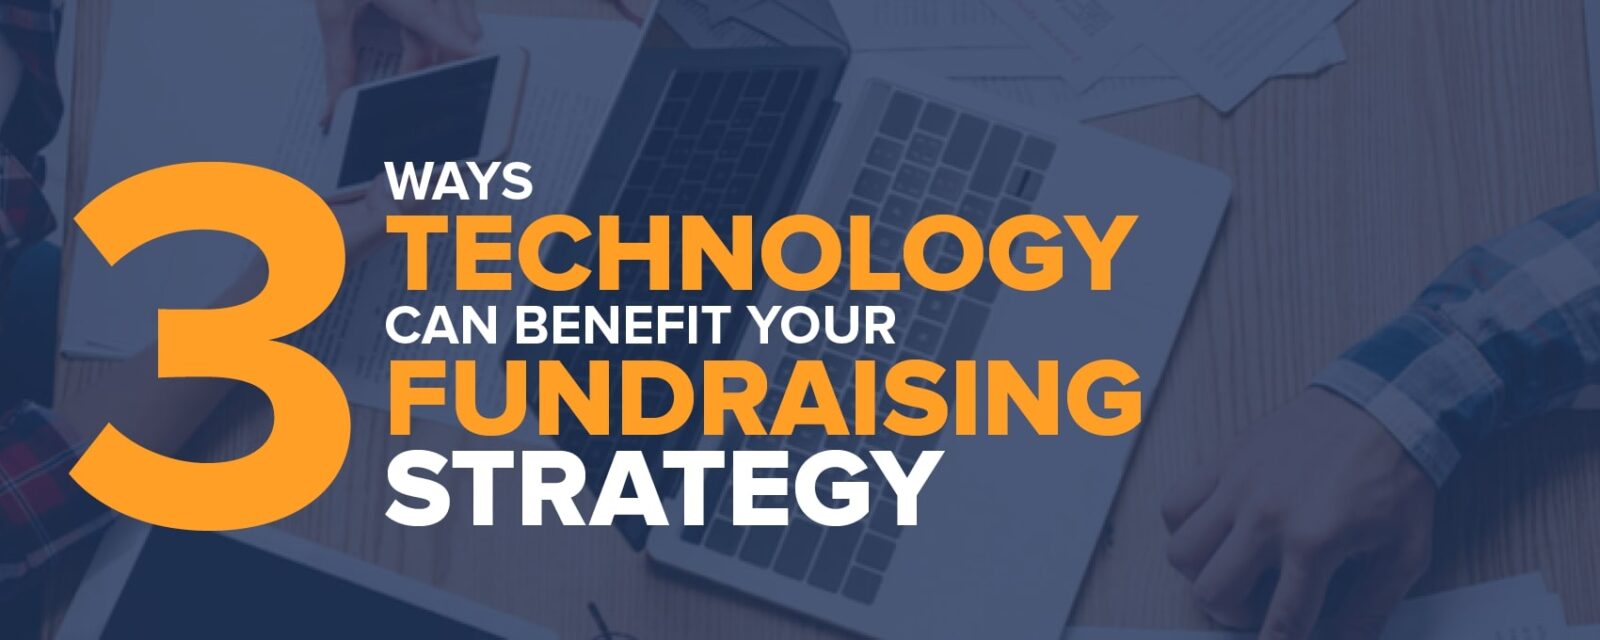 Learn more about how to strengthen your nonprofit's fundraising strategy using technology.